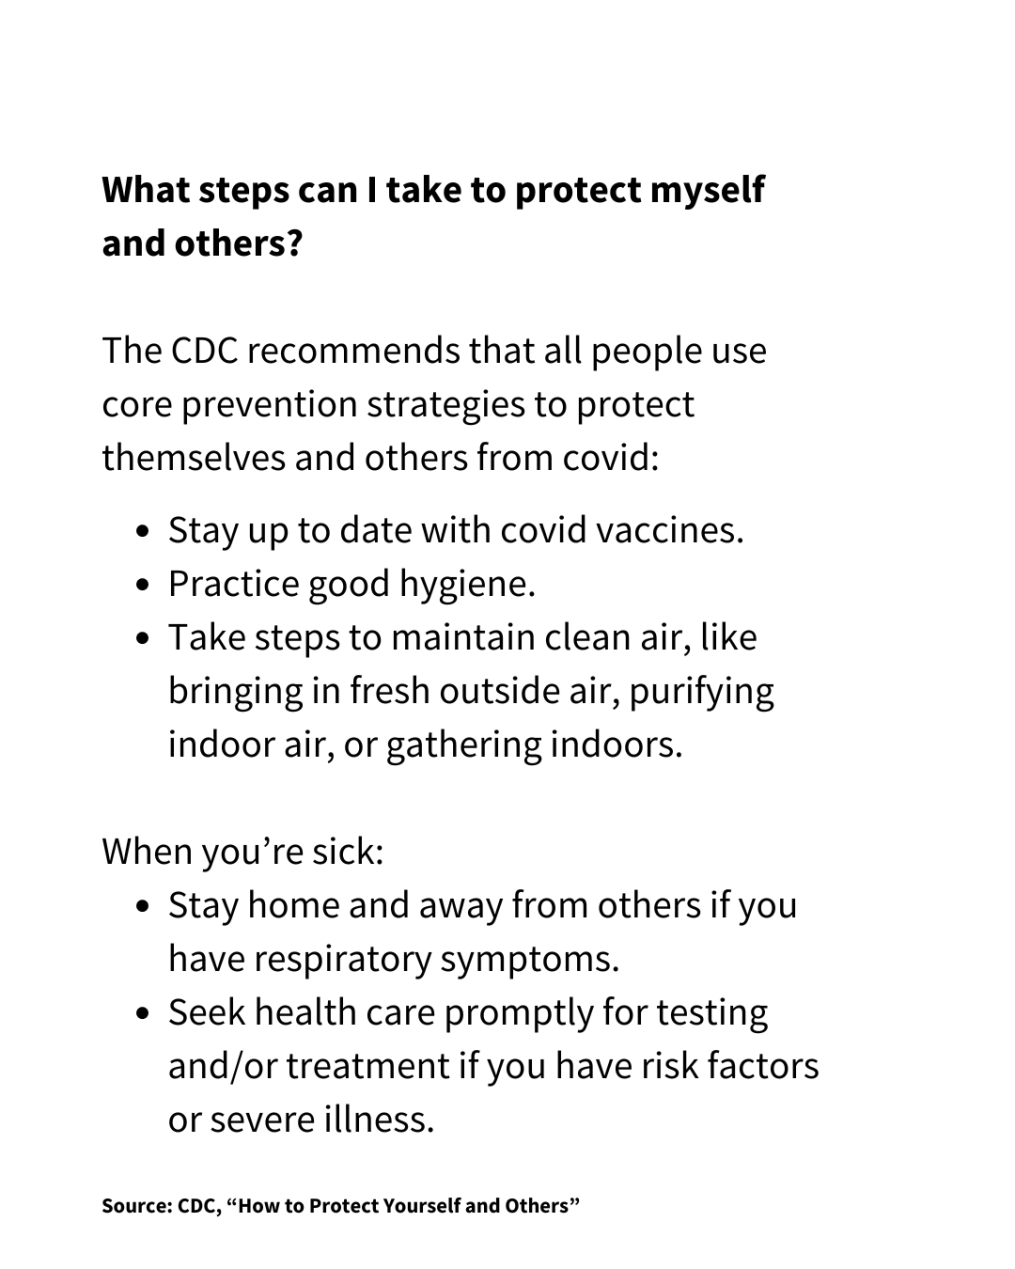 A slide with black text on a white background reads: What steps can I take to protect myself and others?The CDC recommends that all people use core prevention strategies to protect themselves and others from covid:Stay up to date with covid vaccines. Practice good hygiene. Take steps to maintain clean air, like bringing in fresh outside air, purifying indoor air, or gathering indoors.When you’re sick:Stay home and away from others if you have respiratory symptoms. Seek health care promptly for testing and/or treatment if you have risk factors or severe illness. Source: CDC, “How to Protect Yourself and Others”